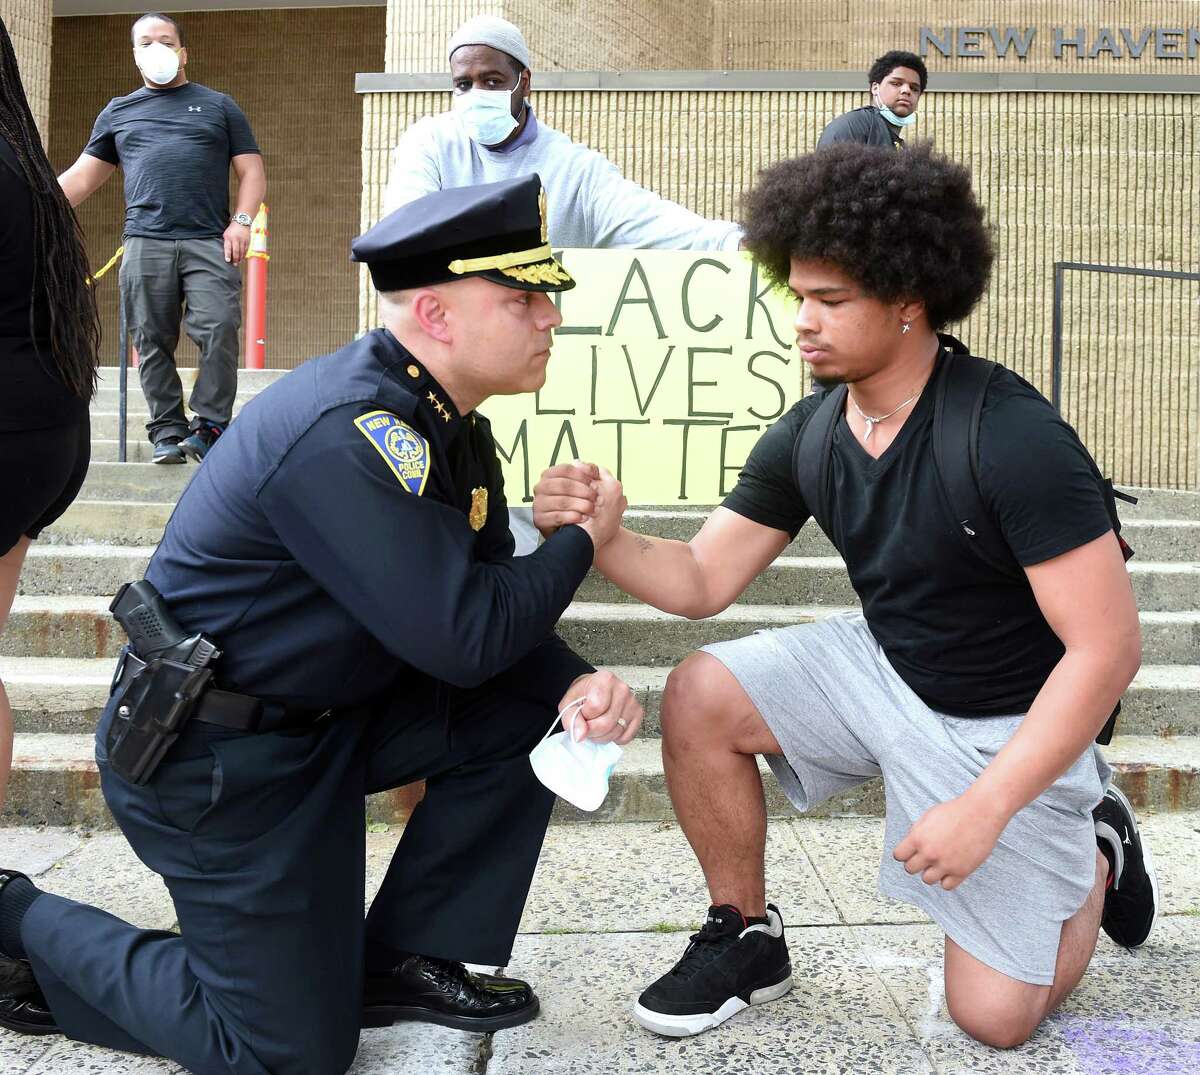 New Haven Police Chief Otoniel Reyes (left) takes a knee to the ground with Wilbur Cross junior Jabez Cubiz, 18, in front of the New Haven Police Department after the chief met with protesters on June 3, 2020 in the aftermath of the death of George Floyd at the hands of Minneapolis Police.